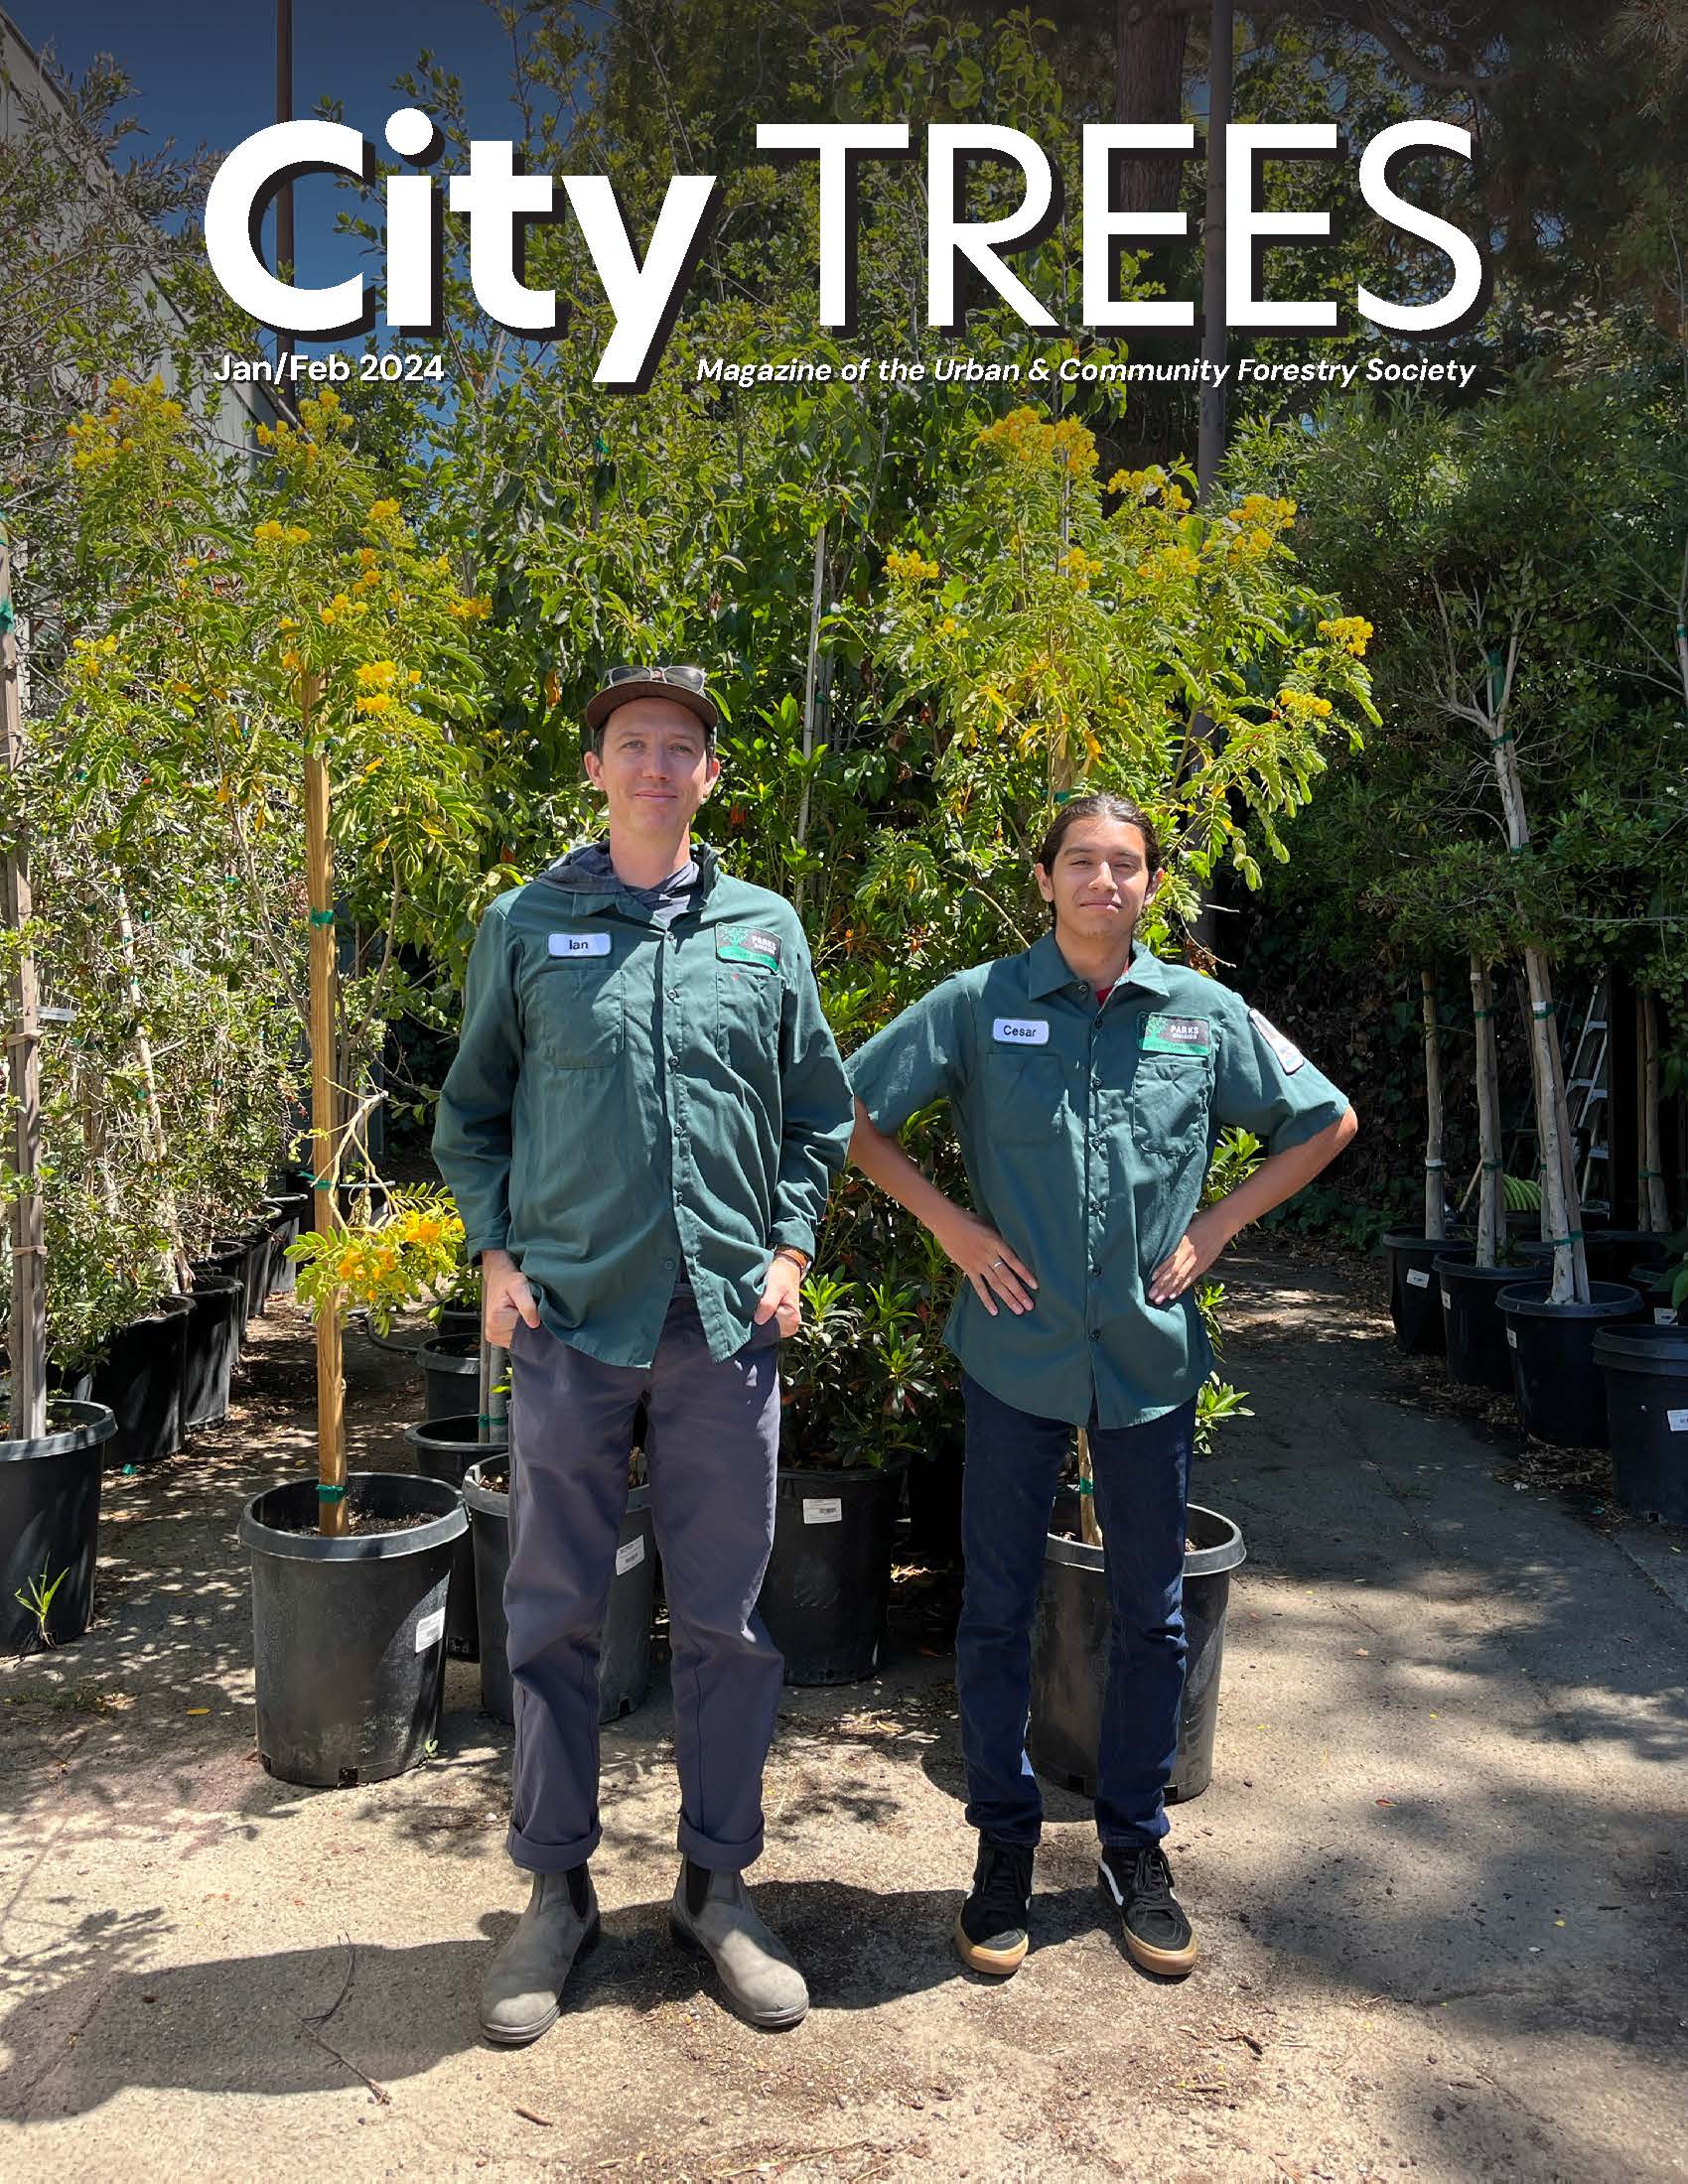 Cover image of January/December 2024 issue of City Trees